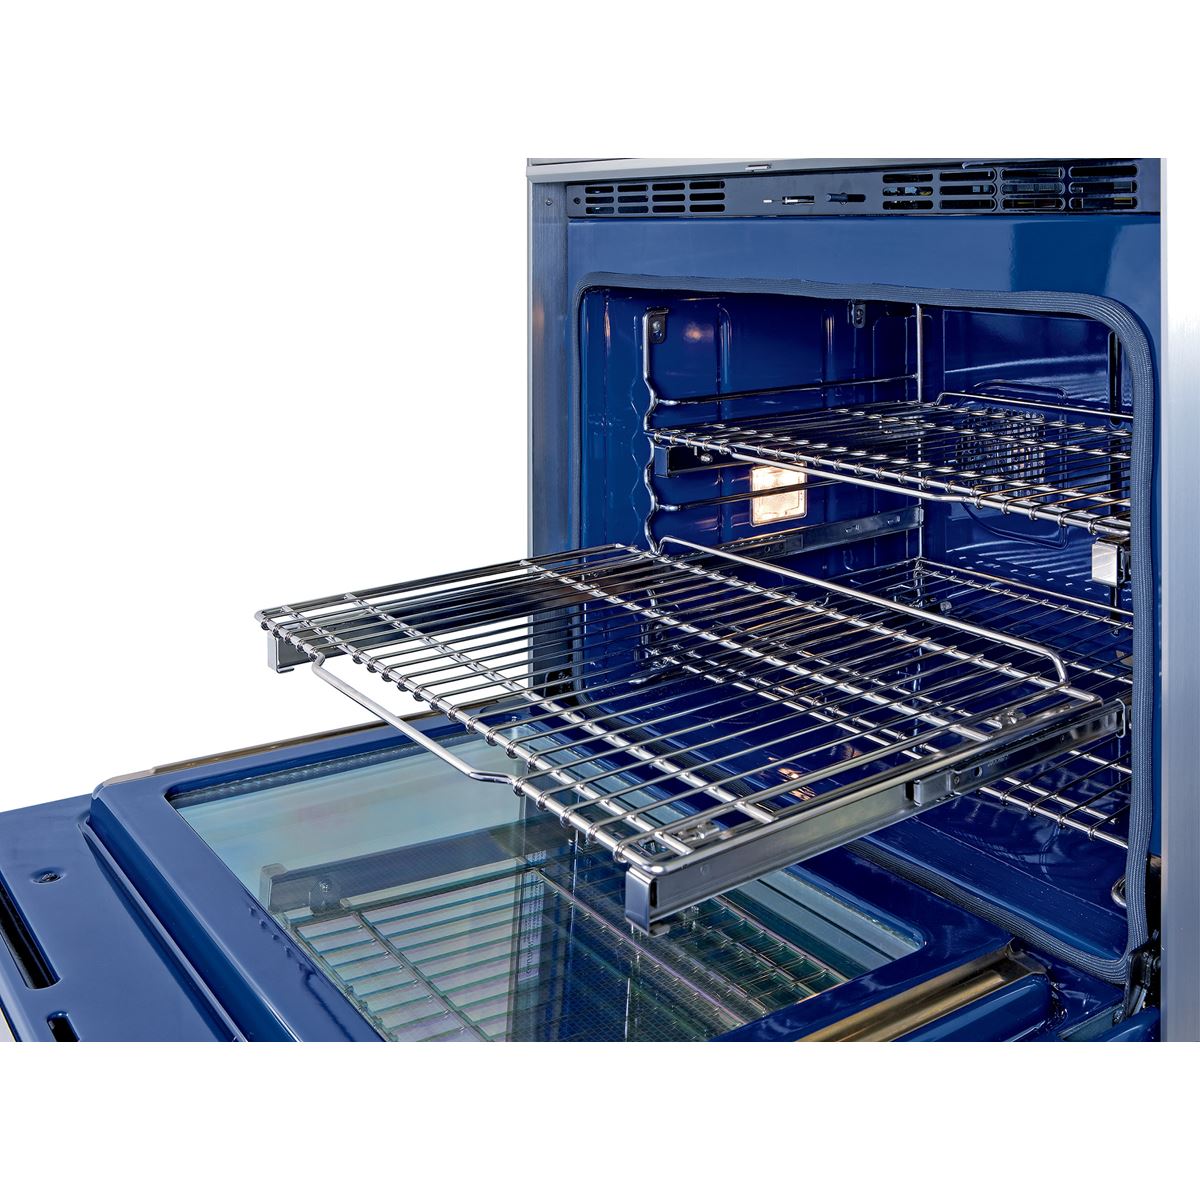 https://www.subzero-wolf.com/-/media/images/united-states/widen/accessories/full-extension-ball-bearing-oven-rack_e_df.jpg?quality=80&height=1200&width=1200&hash=51AD1CDBF8FBE10C336E9C9E45C49C22